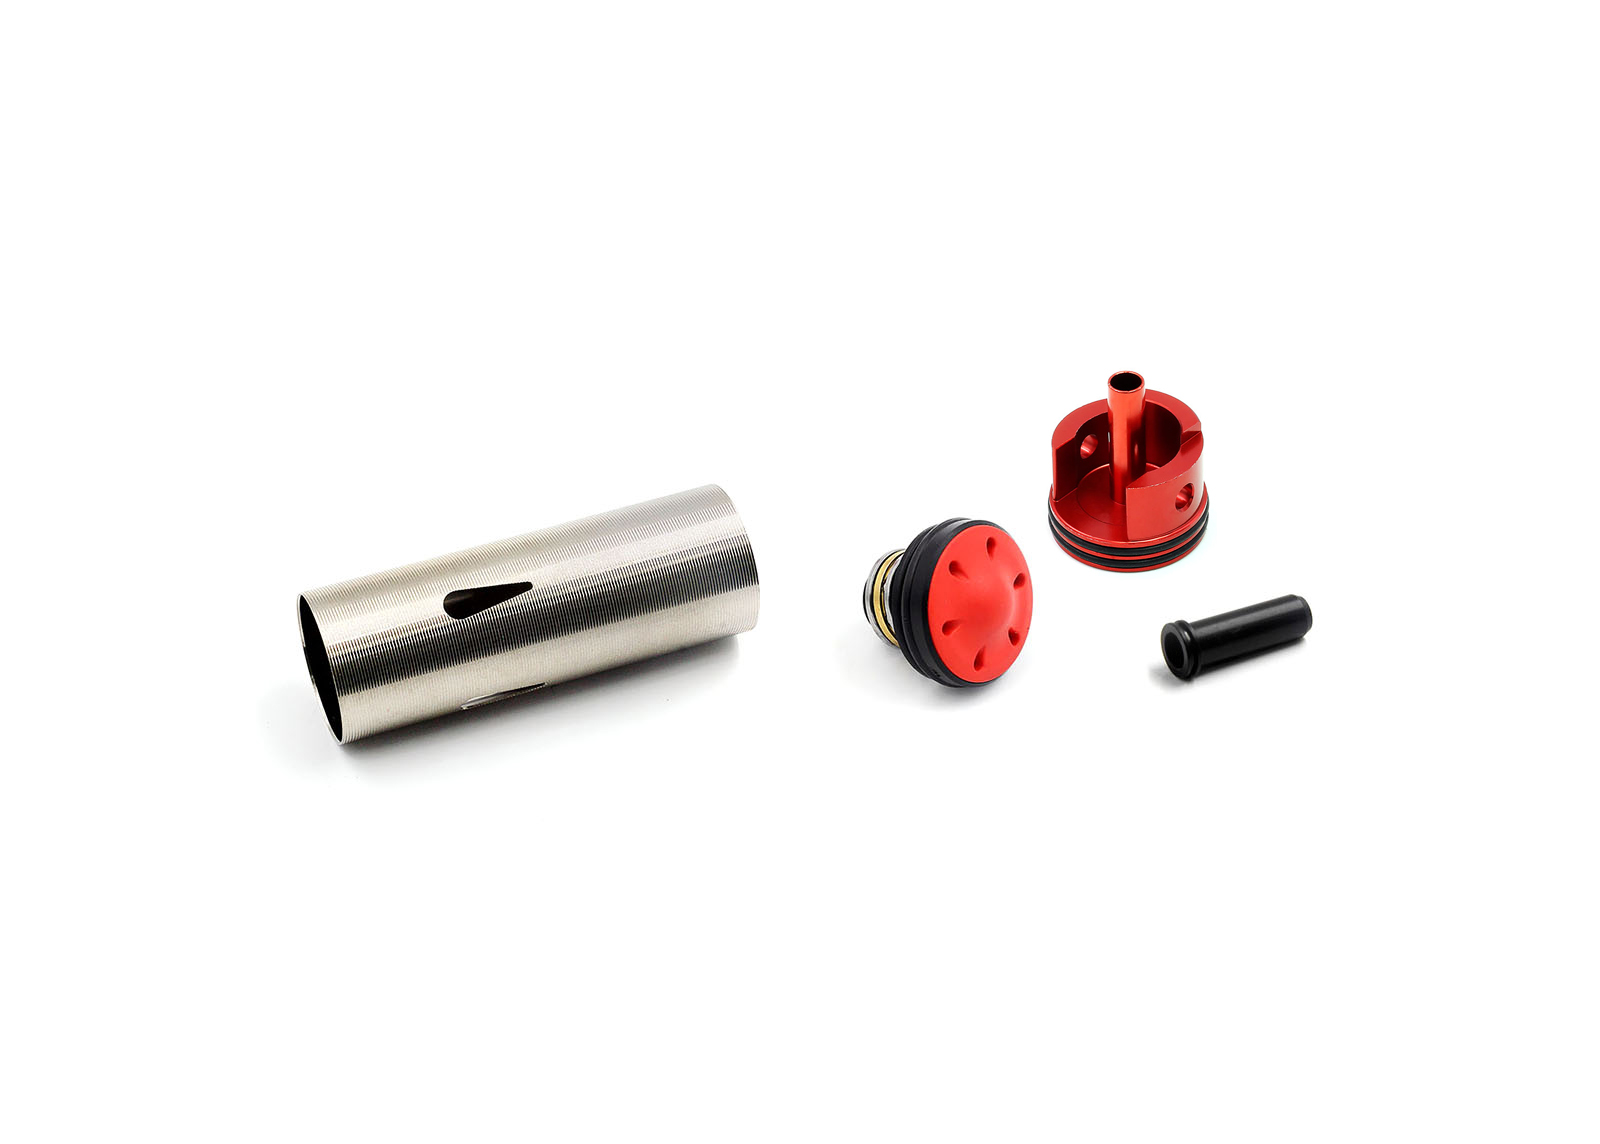 Bore-Up Cylinder Set for G36C - Modify AEG Airsoft parts